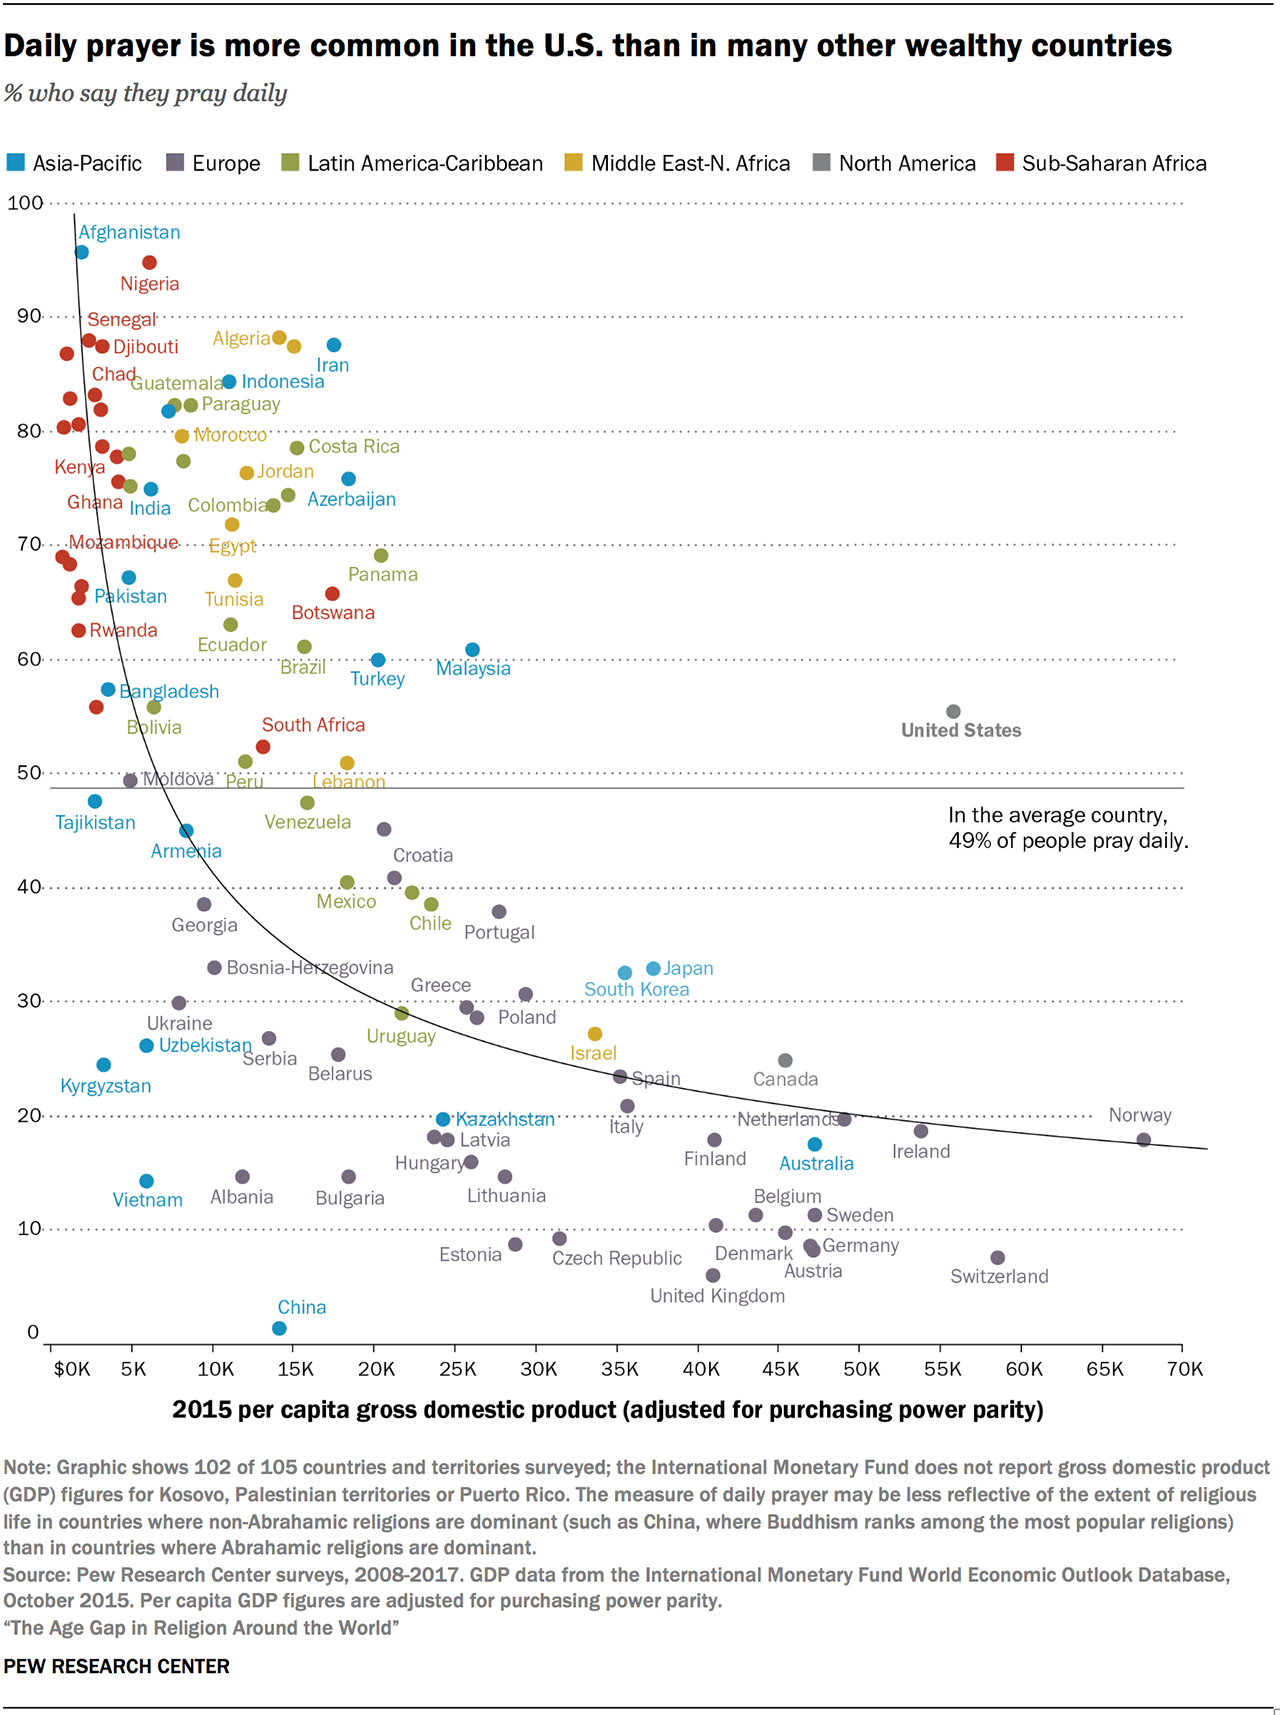 Daily prayer is more common in the U.S. than in many other wealthy countries